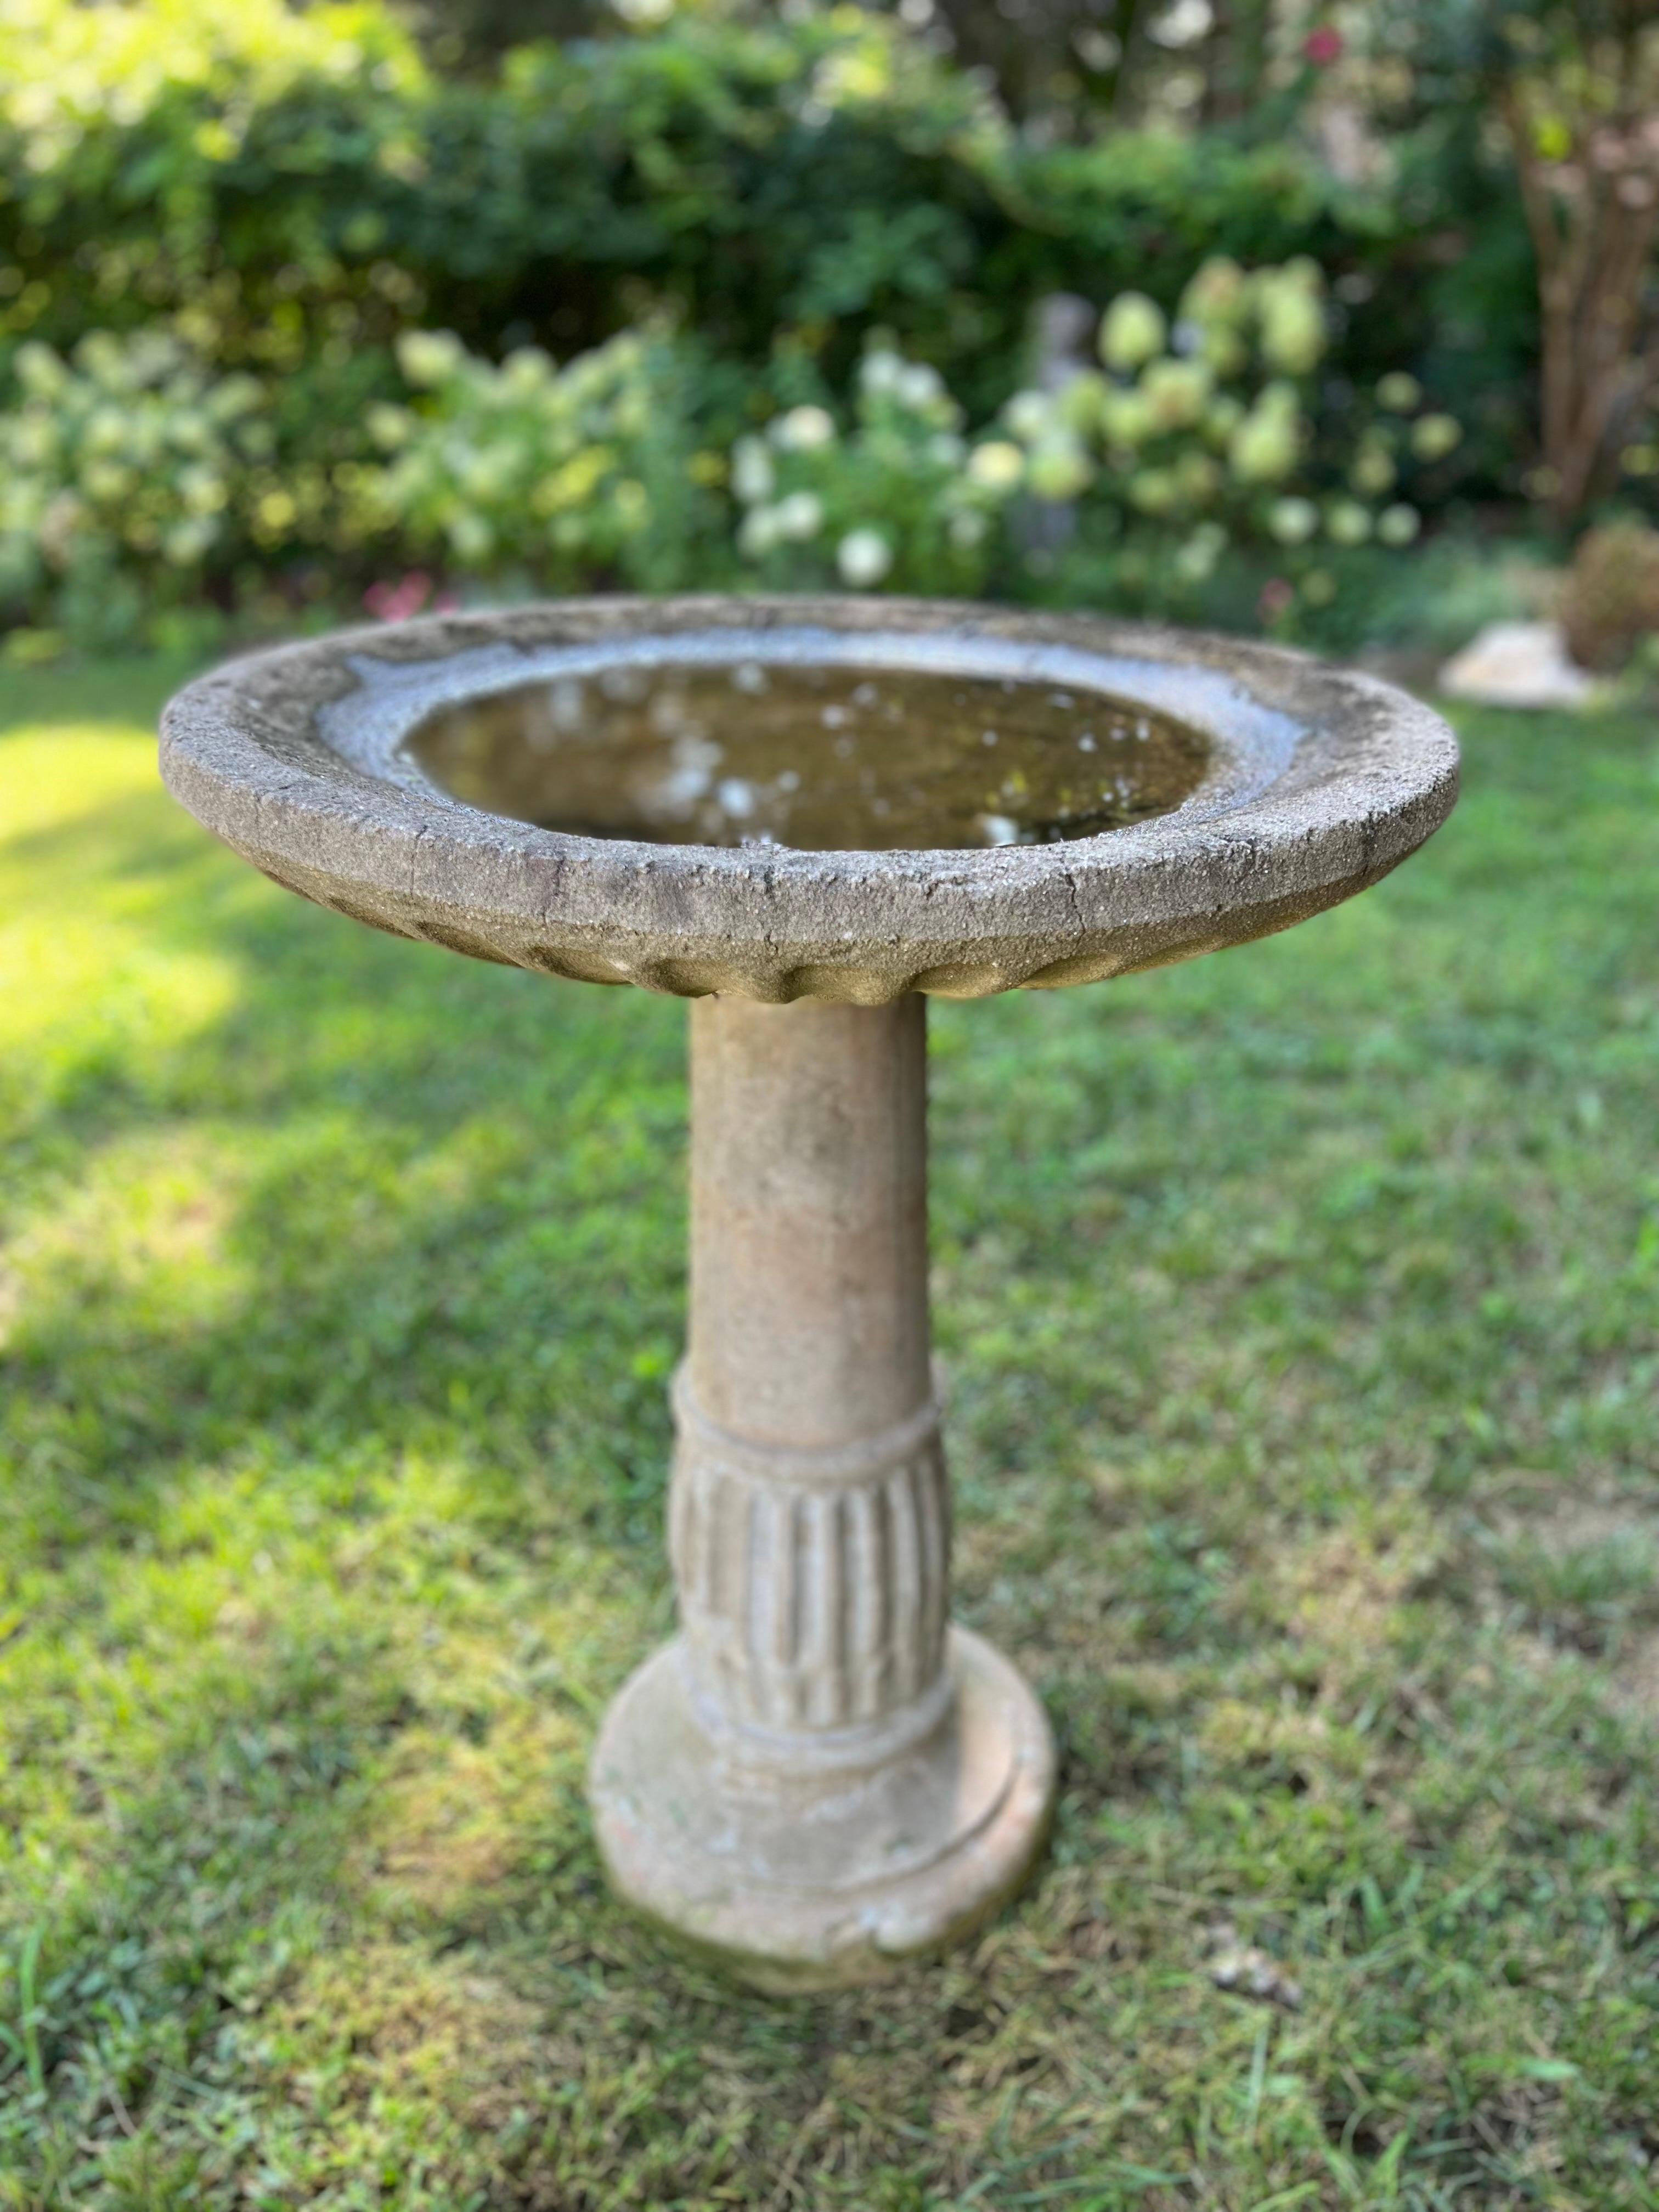 Beautiful cast stone birdbath. A bit taller than usual giving it an elegant statement.
Overall great antique condition with aged patina. 
Adds a touch of elegant interest to any outdoor space.